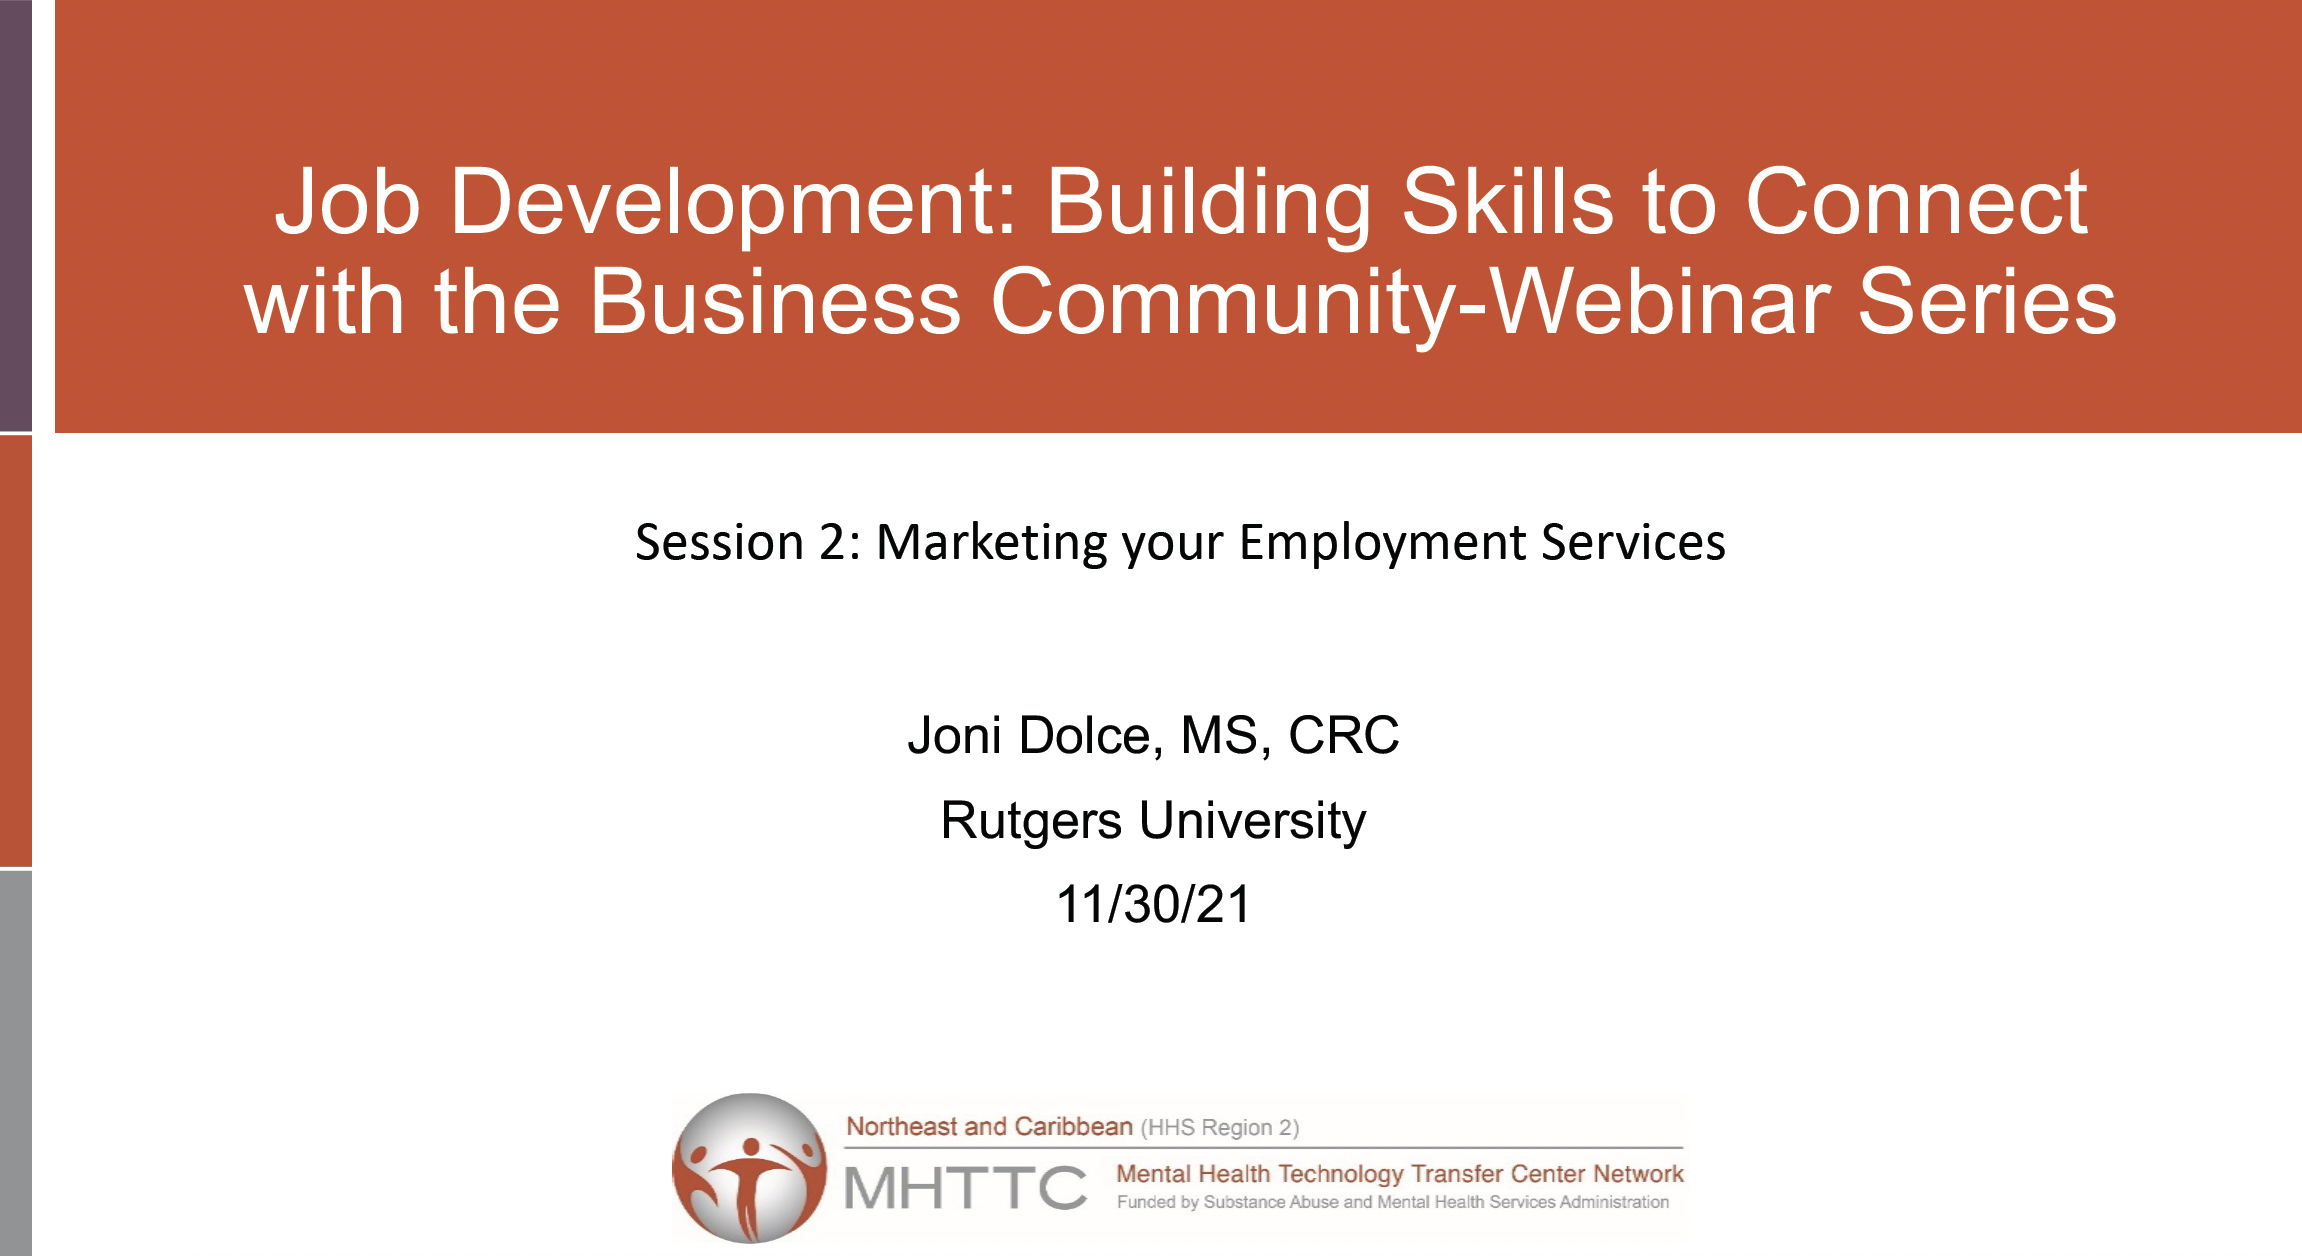 Job Development: Building Skills to Connect with the Business Community-Webinar Series